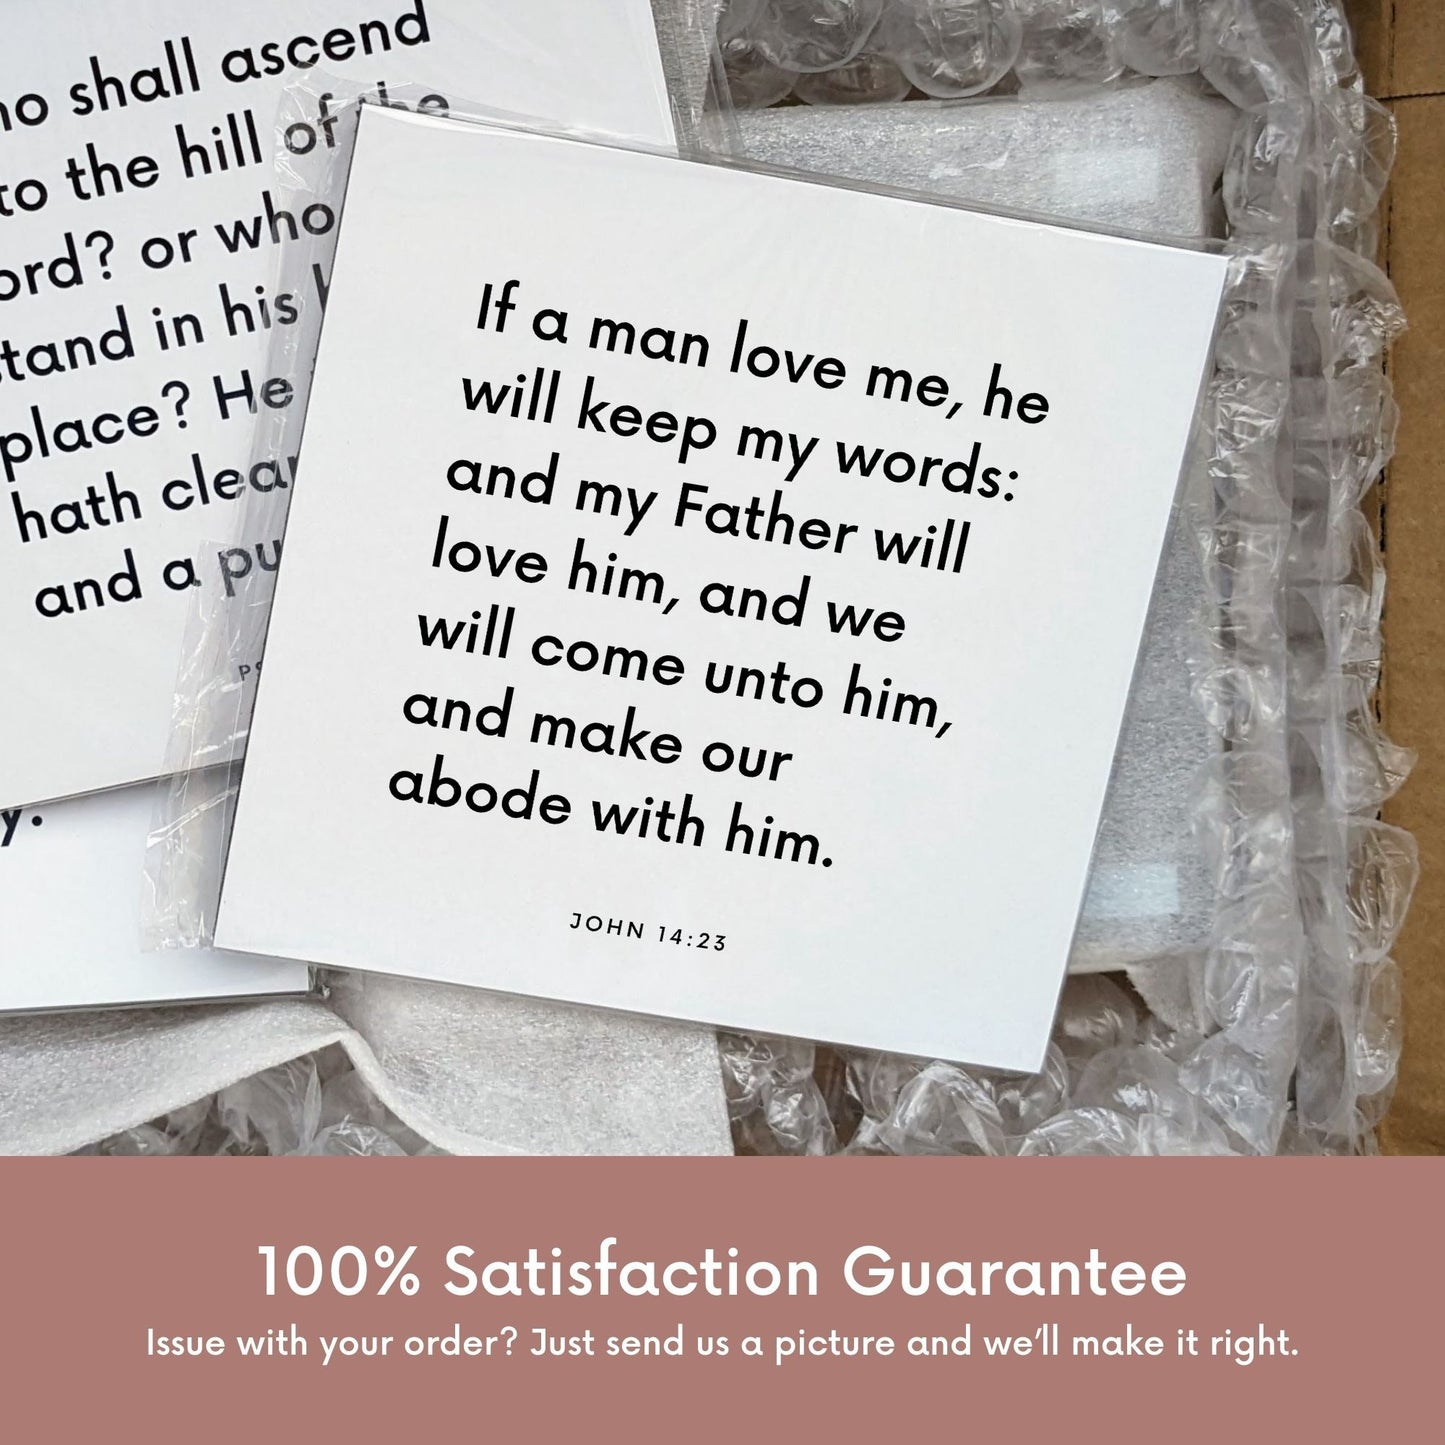 Shipping materials for scripture tile of John 14:23 - "If a man love me, he will keep my words"